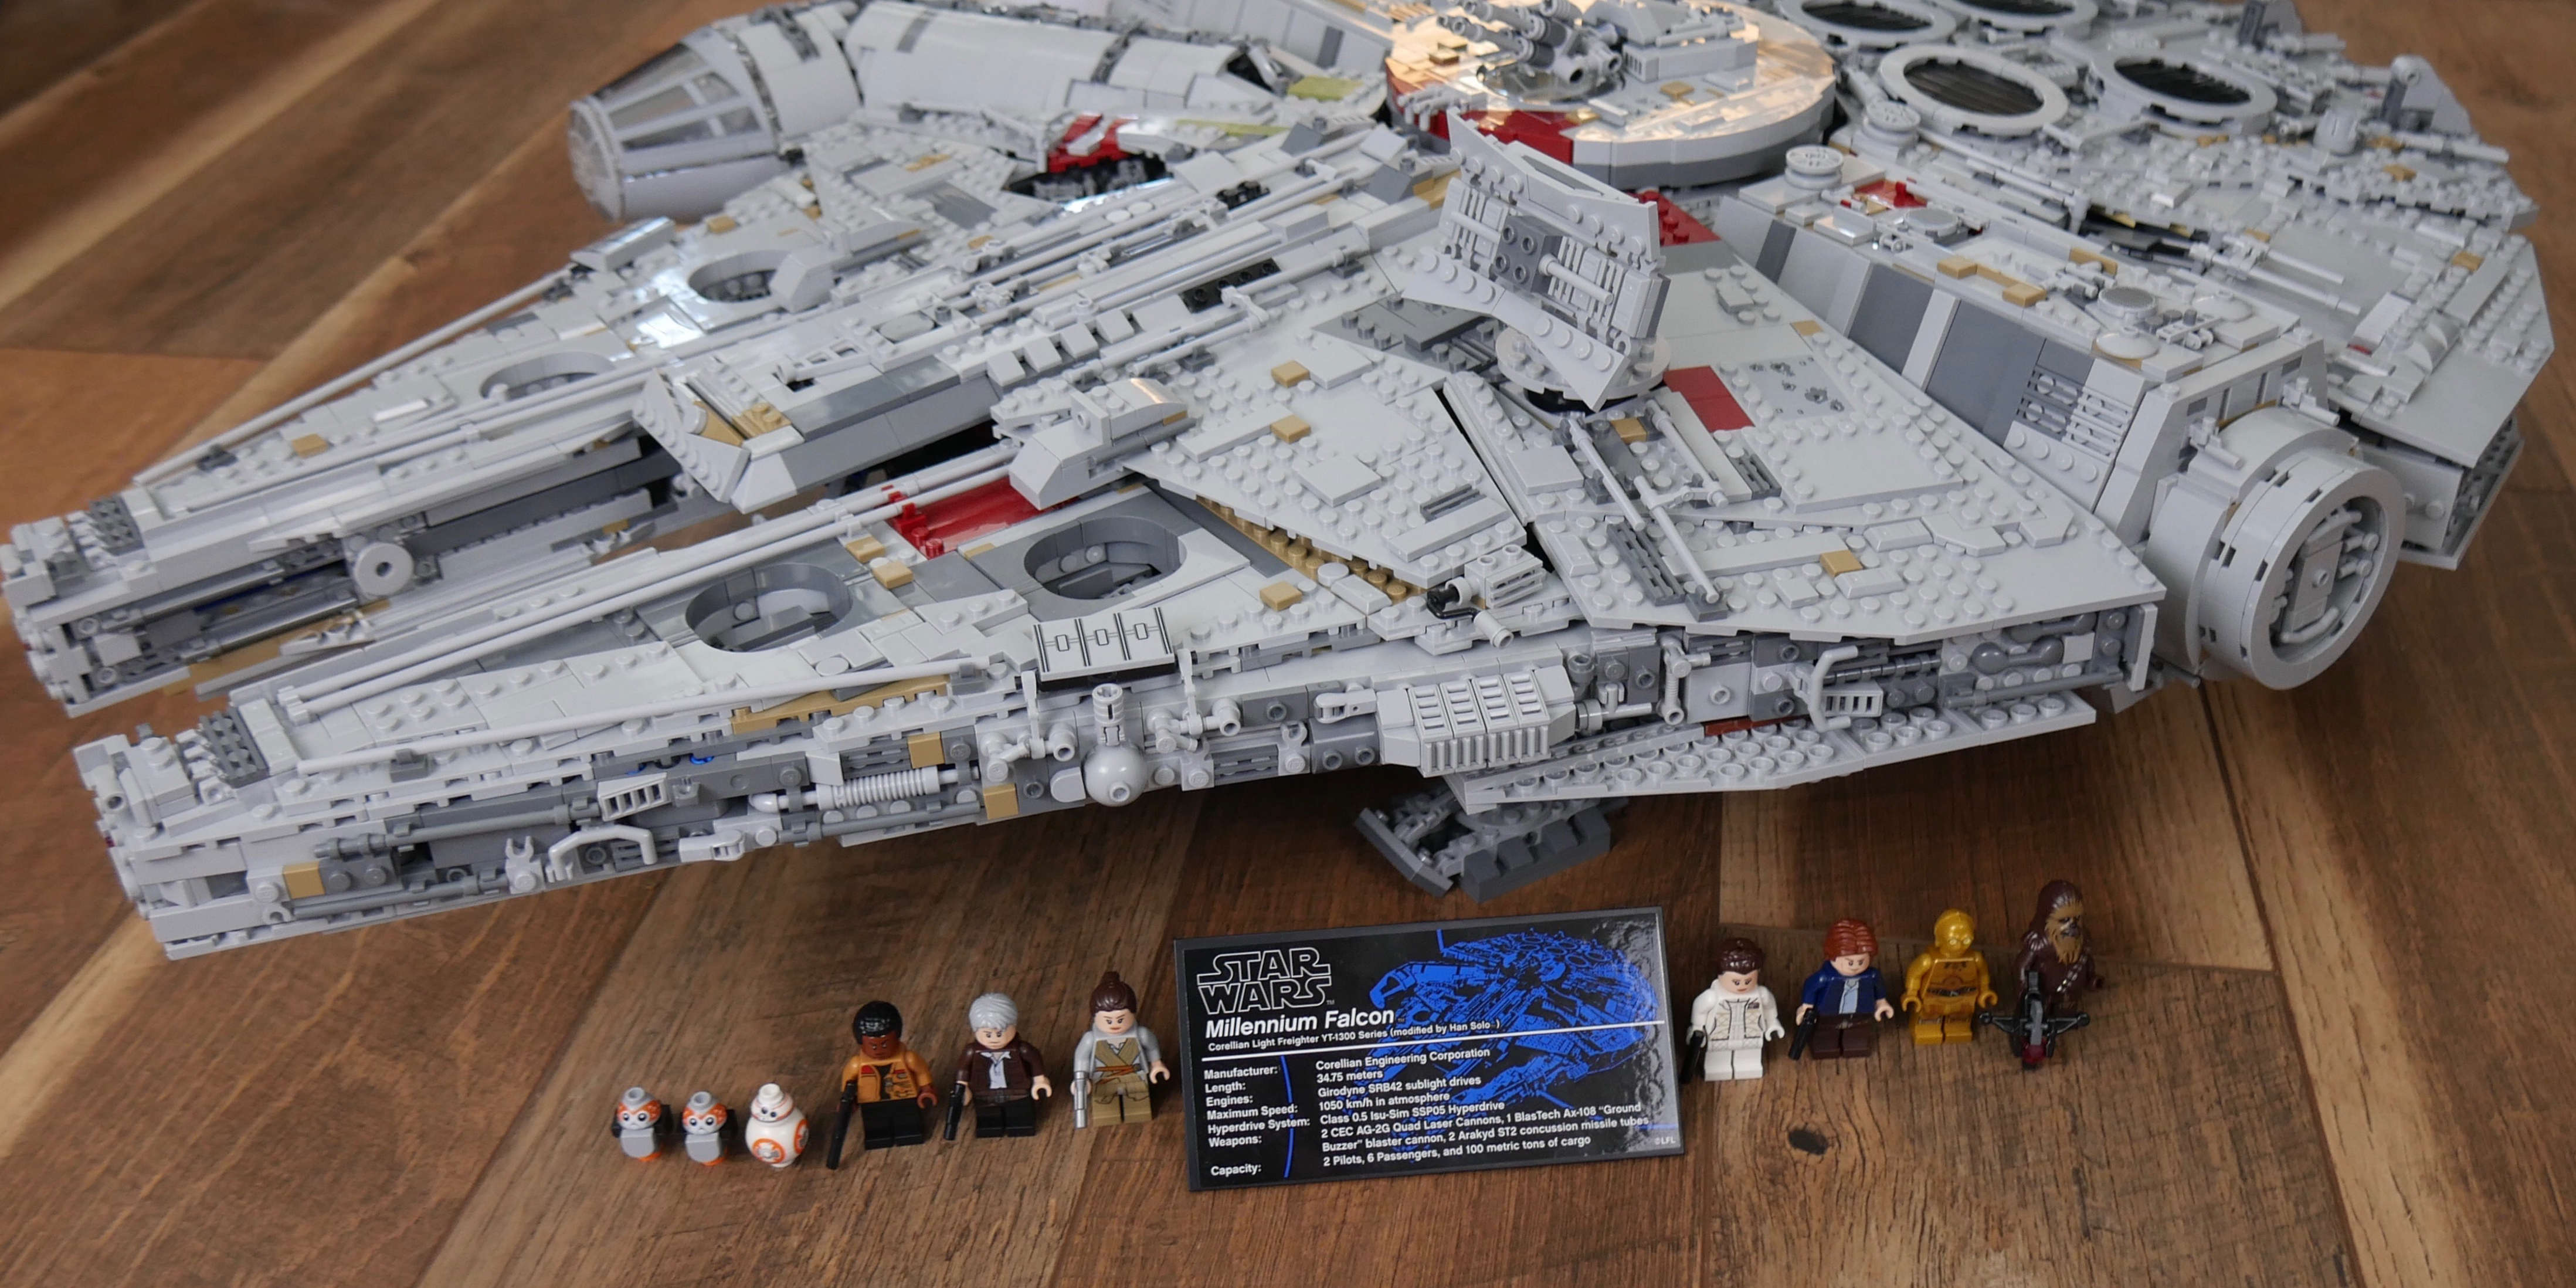 LEGO UCS Millennium Falcon hands-on look - 9to5Toys